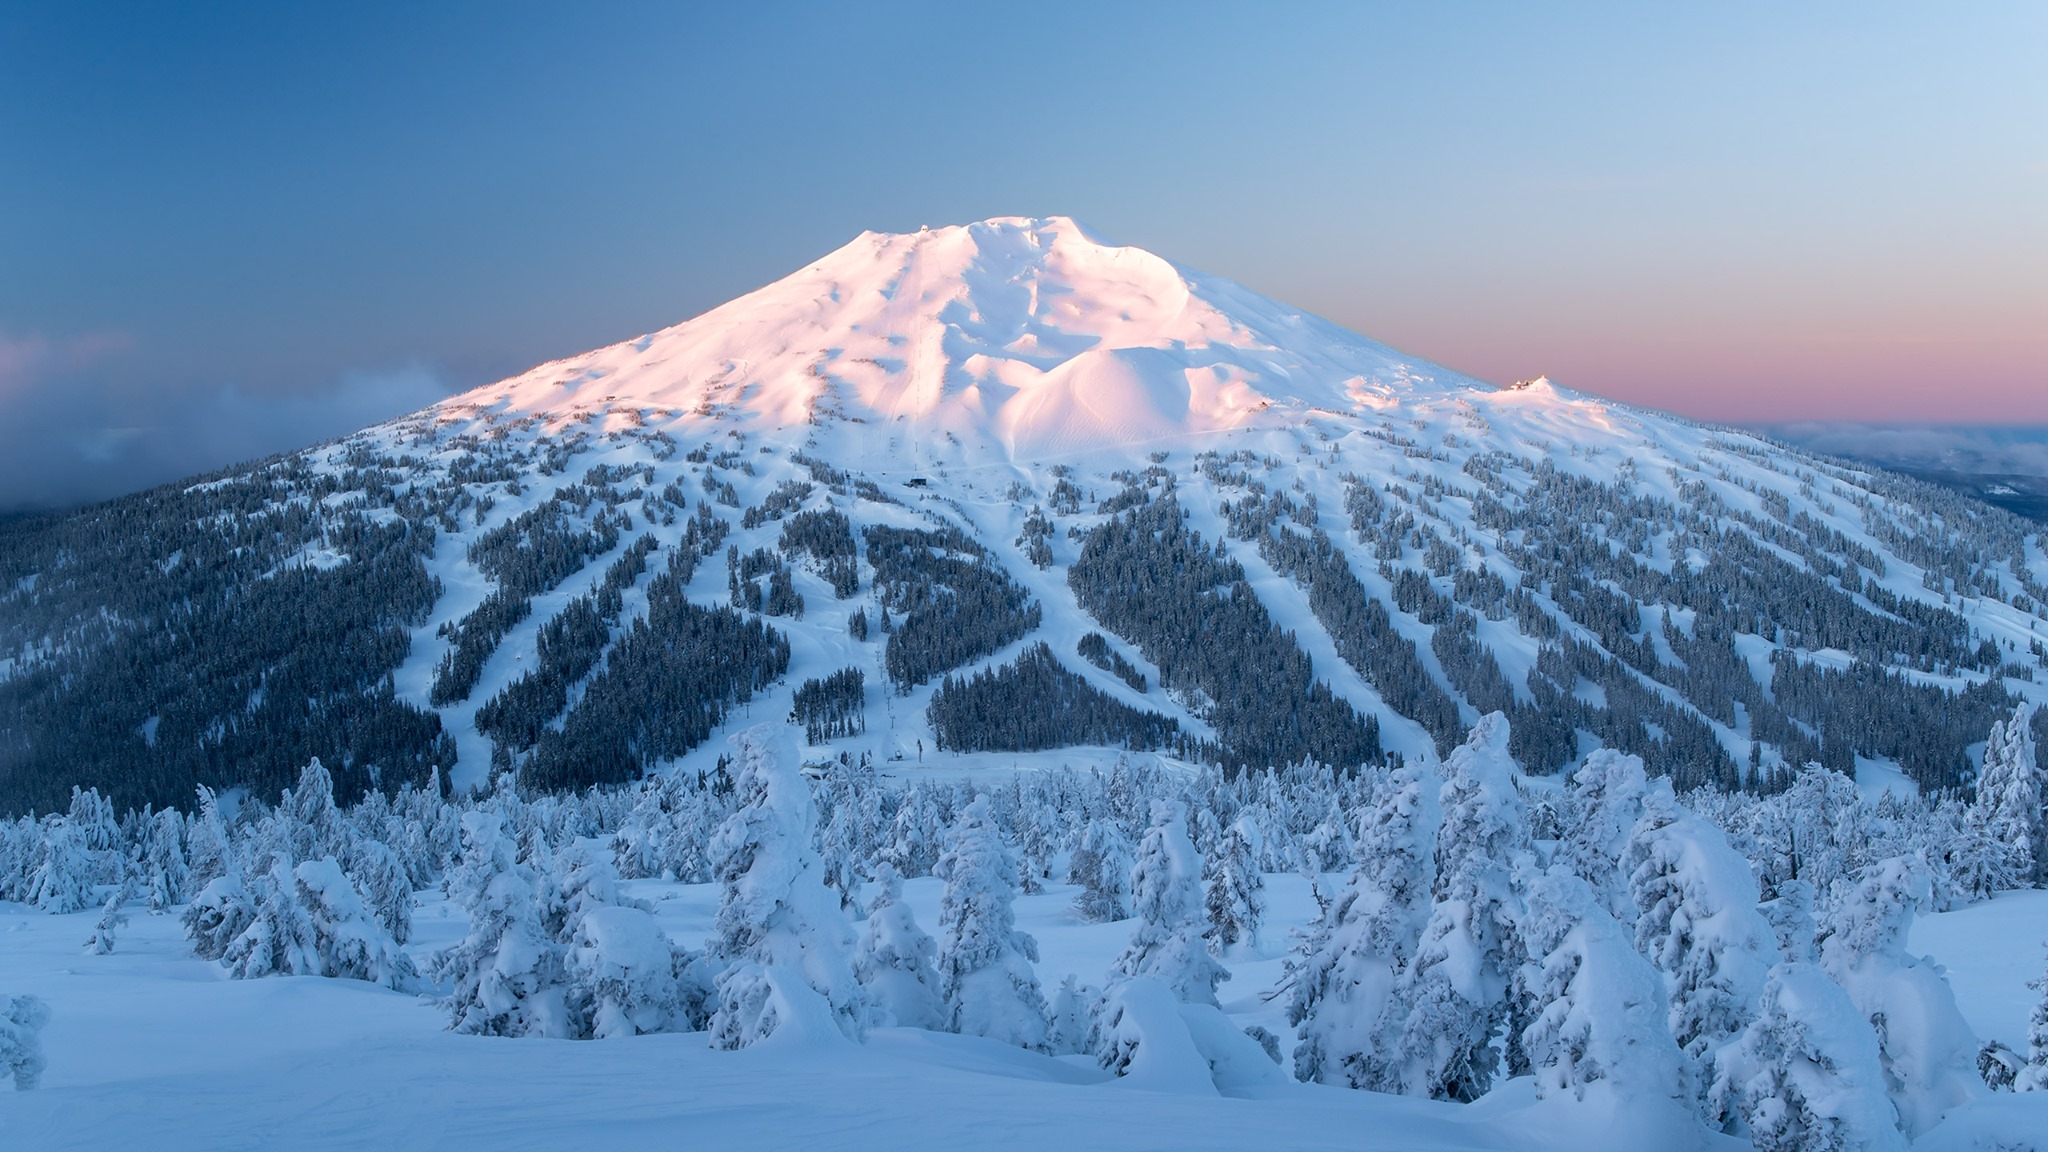 Mt. Bachelor To Offer Cheaper Lift Tickets For Signing Liability Waiver